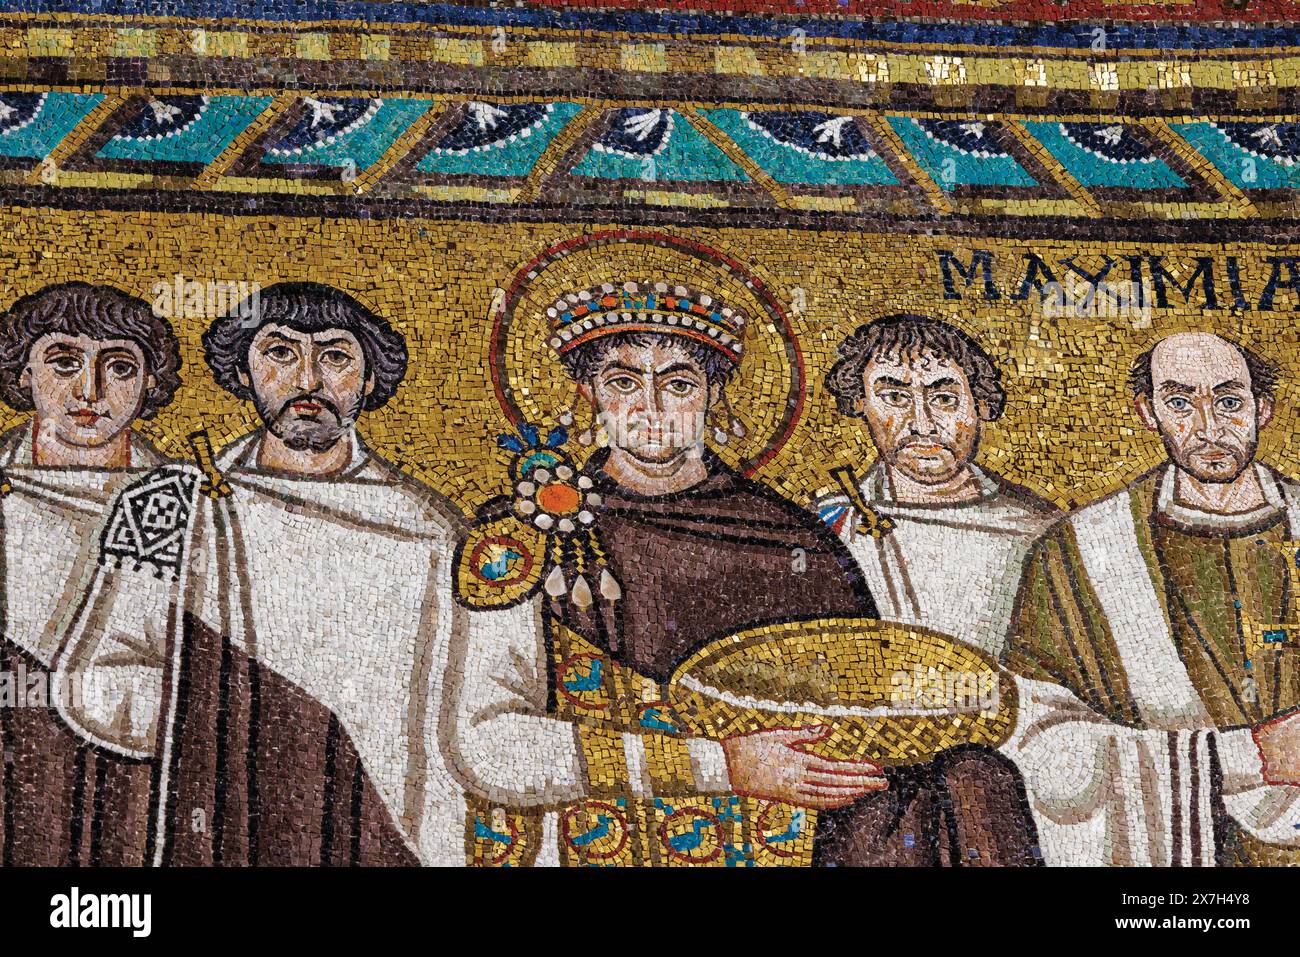 Ravenna, Ravenna Province, Italy. Mosaic in San Vitale basilica of Emperor Justinian I with members of his court. He is carrying a bask Stock Photo